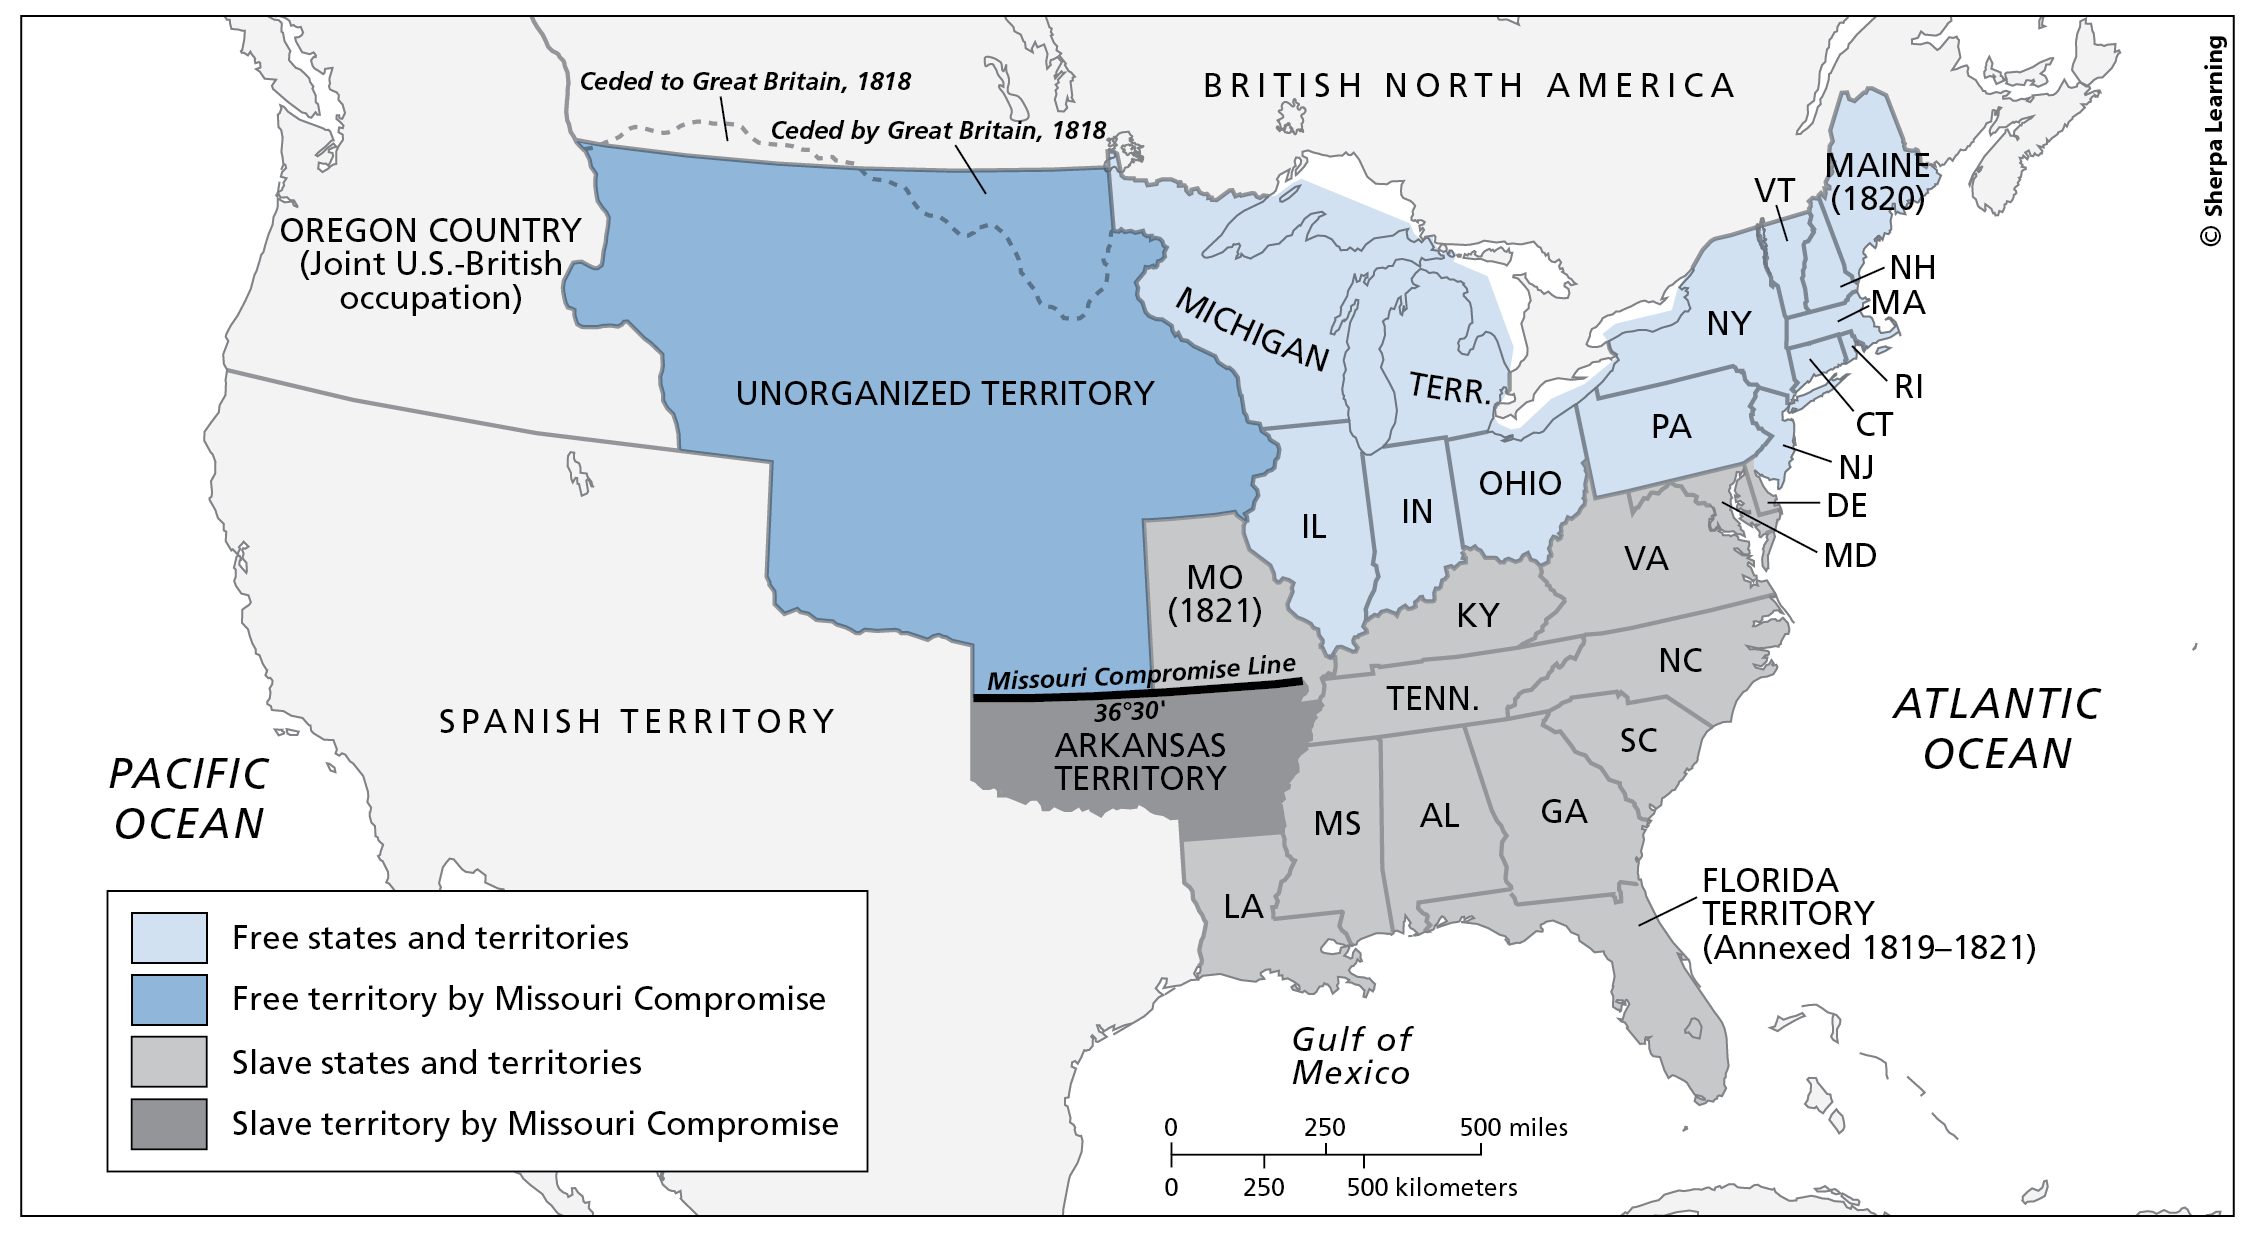 Skillbook Visual Source Exercise #3 - Map: The Missouri Compromise